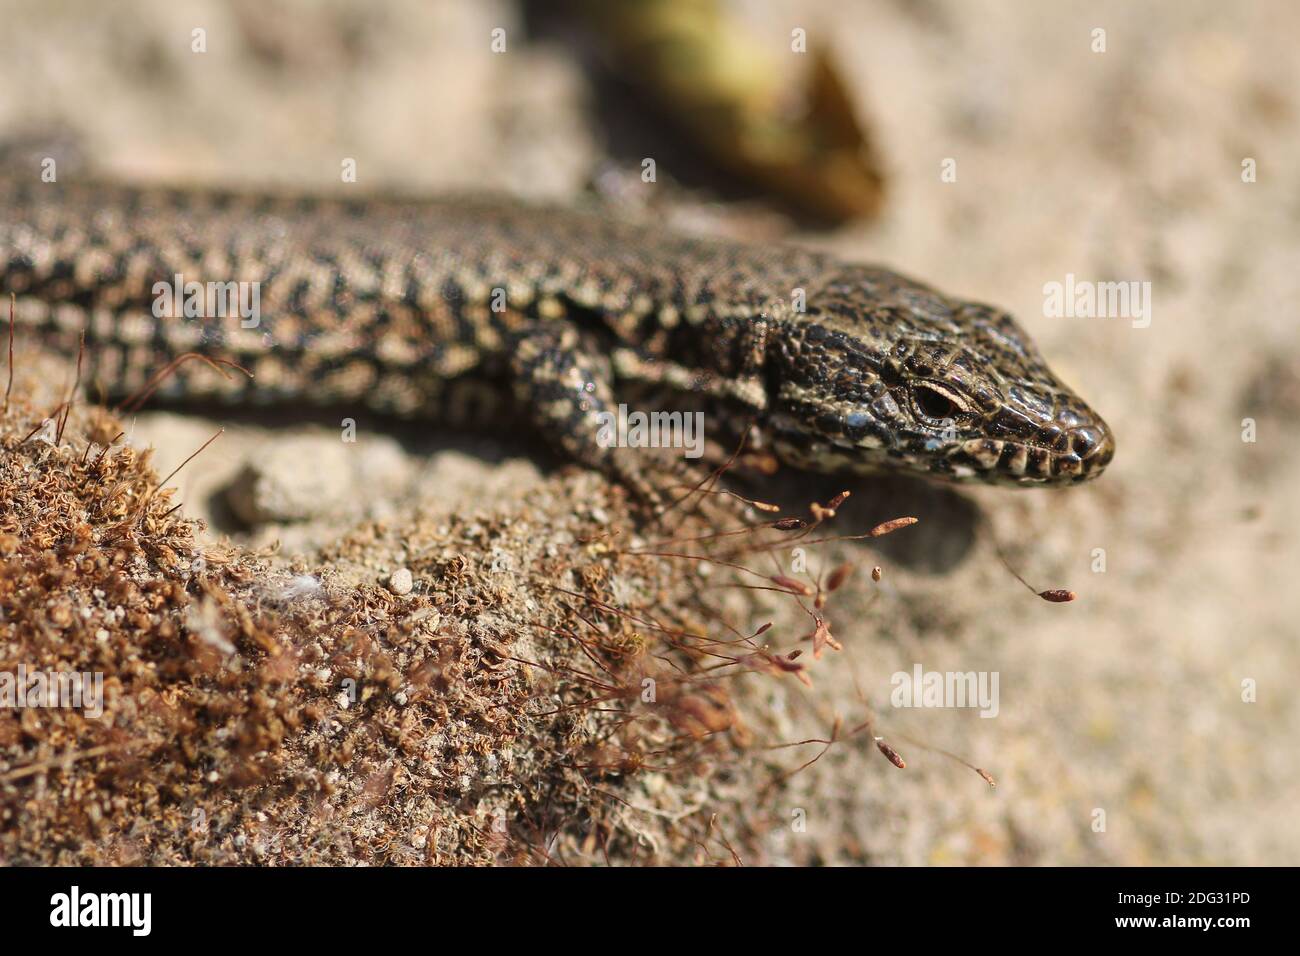 Common Wall Lizard (Podarcis muralis) at a stone-wall in the town of Castrop-Rauxel, Germany Stock Photo